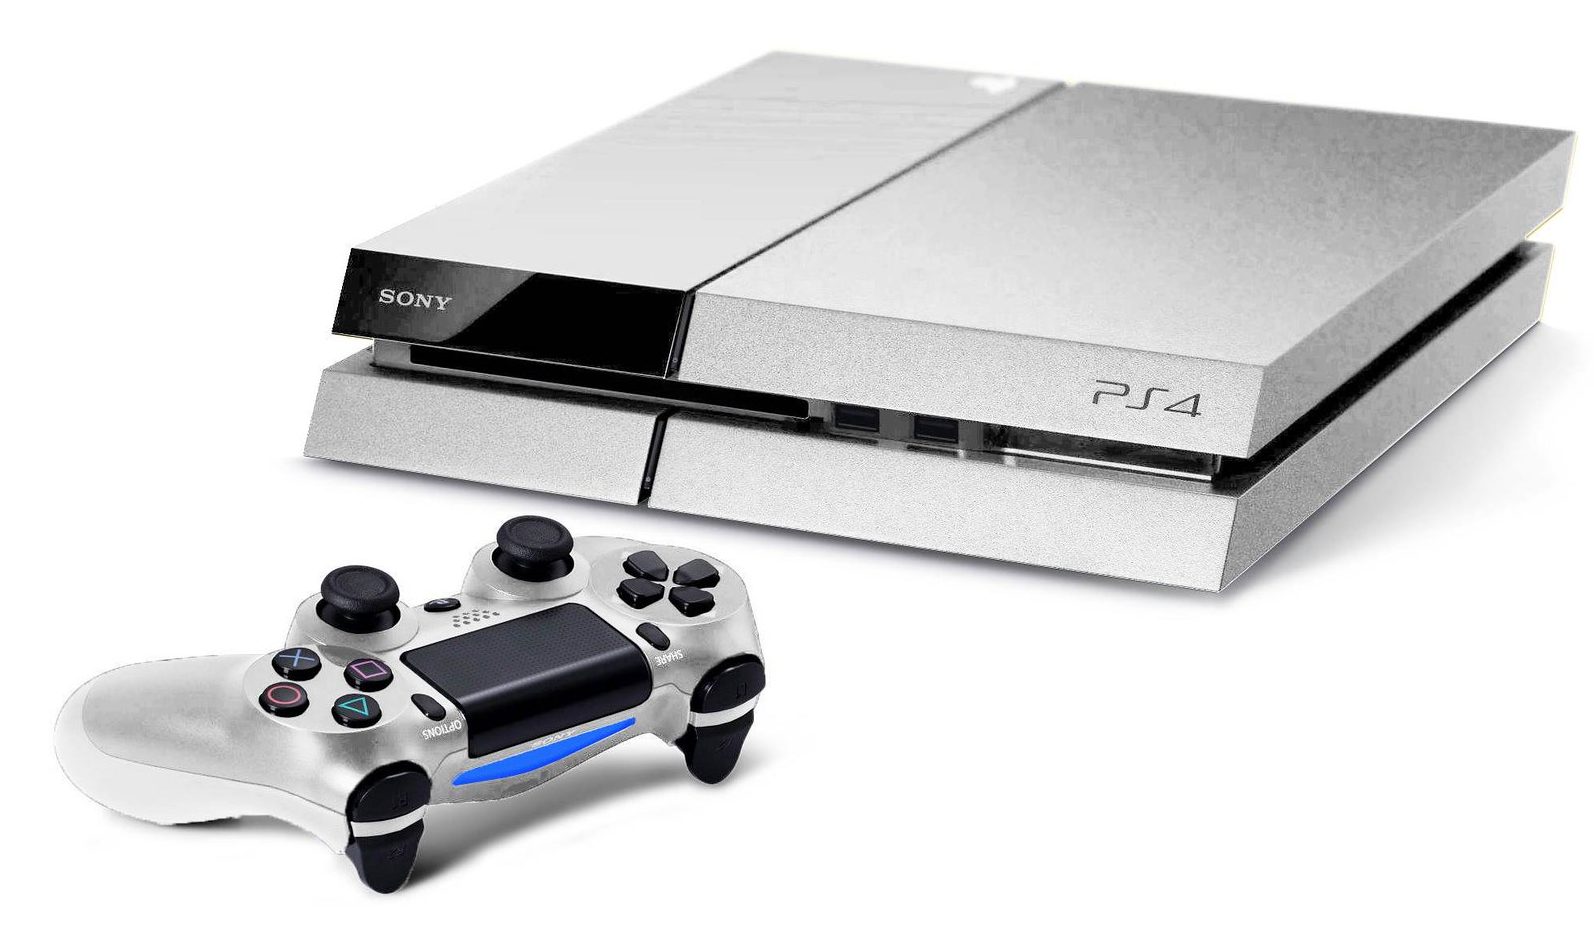 Bluray player PS4